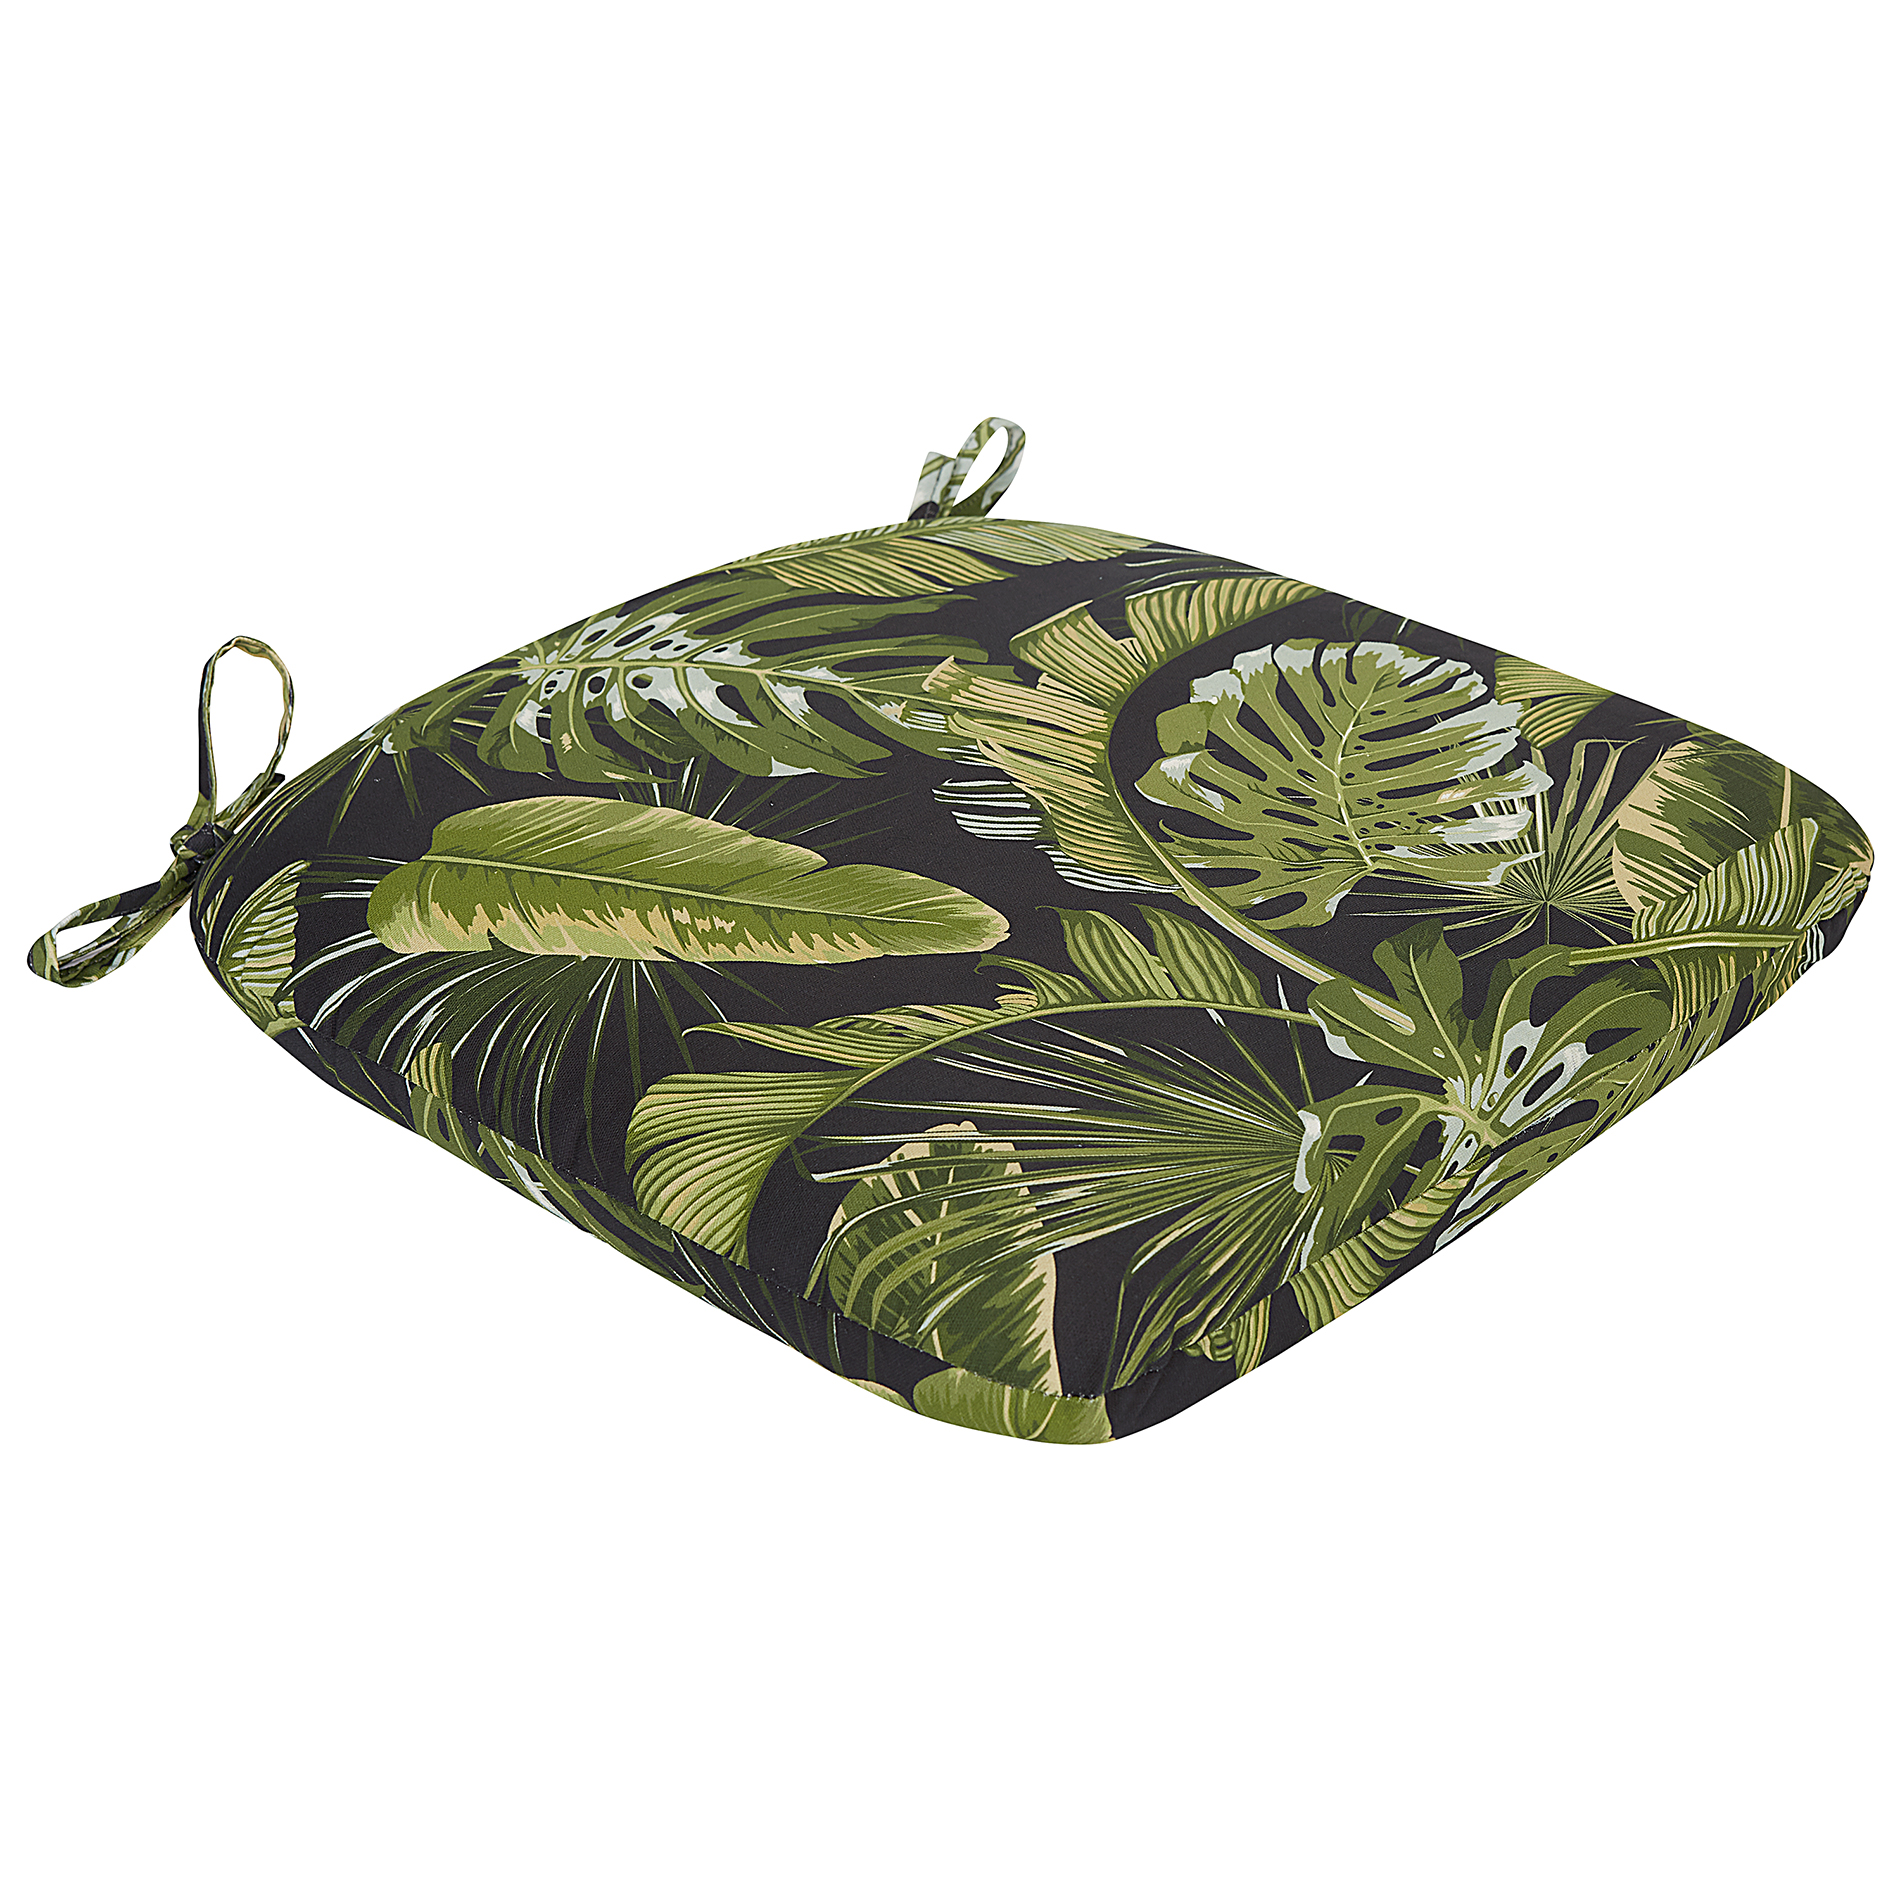 Sutton Rowe Green Palm Seat Pad